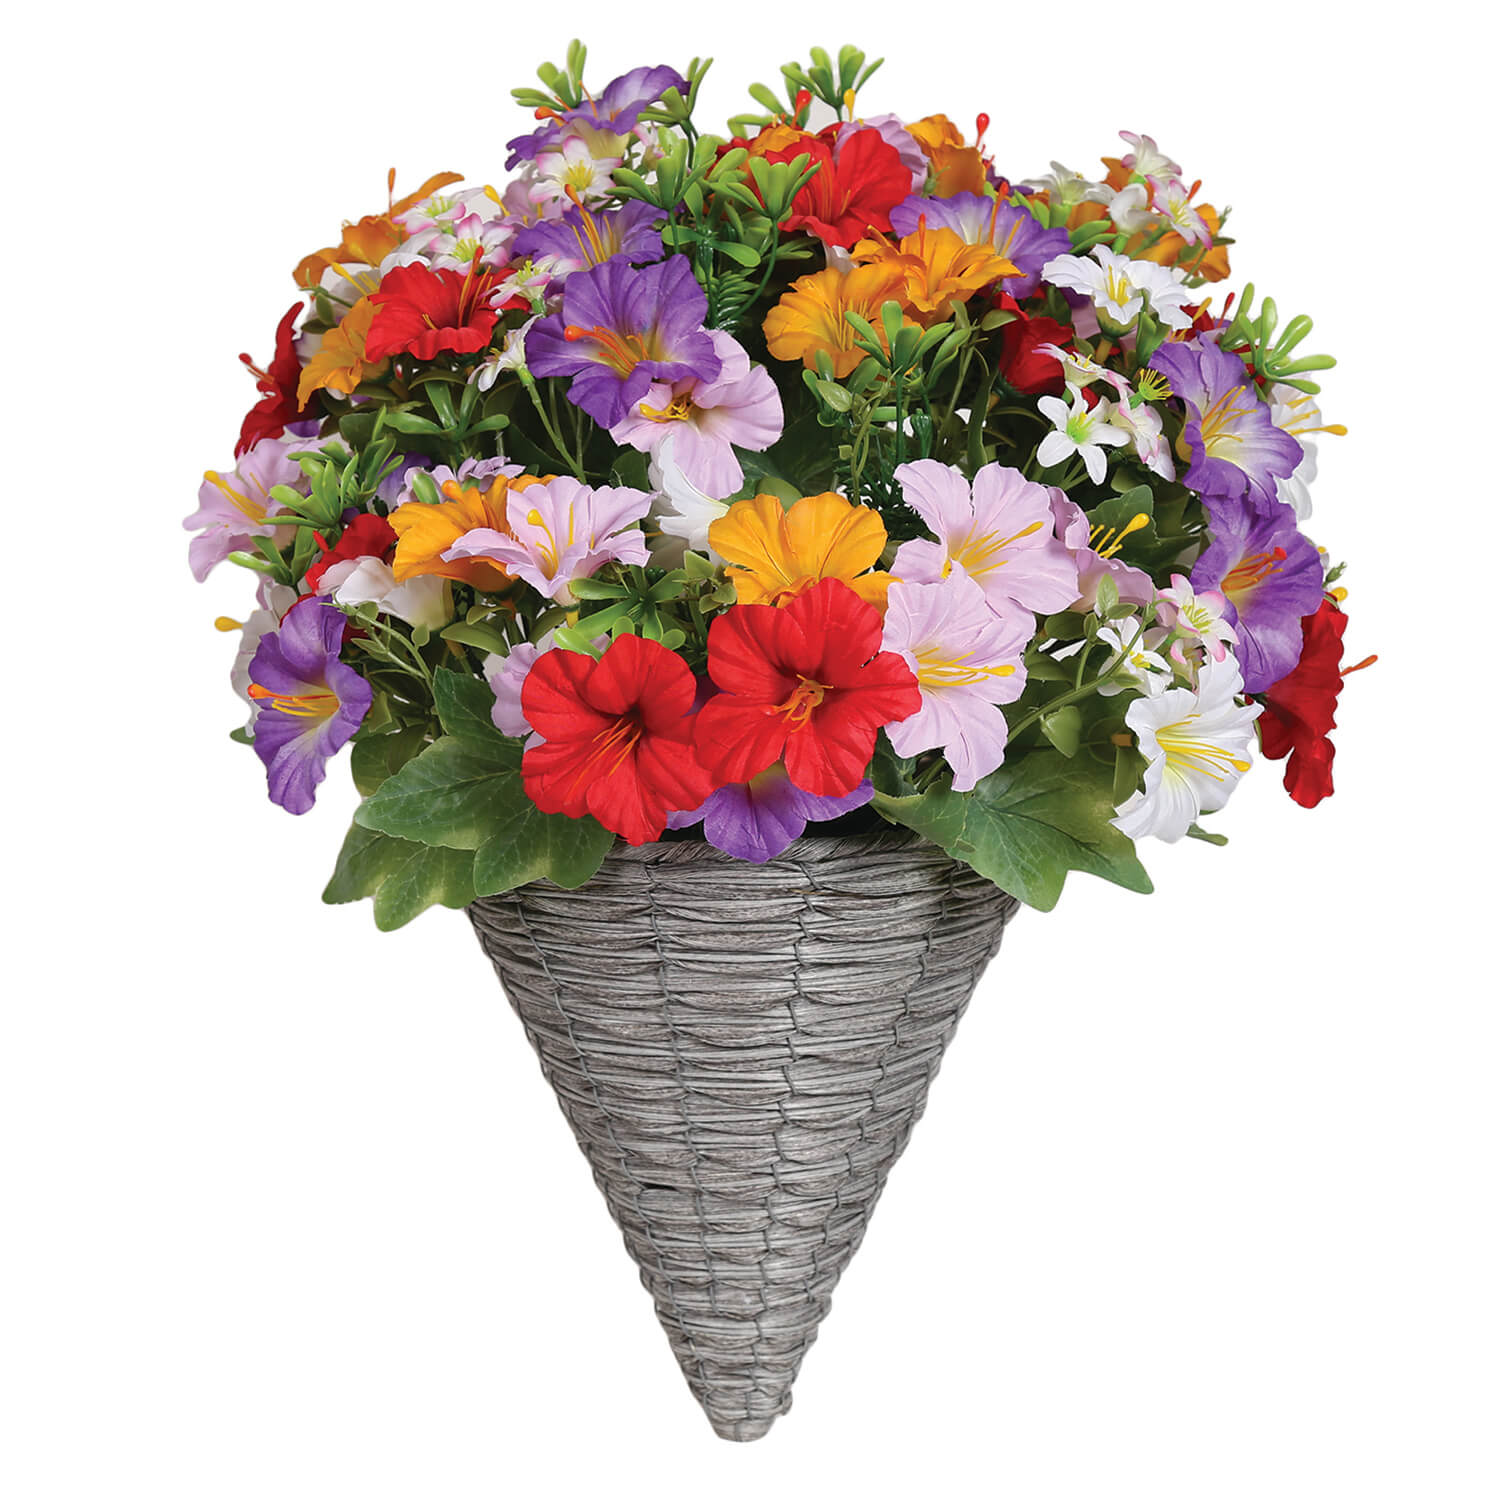 The Home Petunia Wall Basket 1 Shaws Department Stores